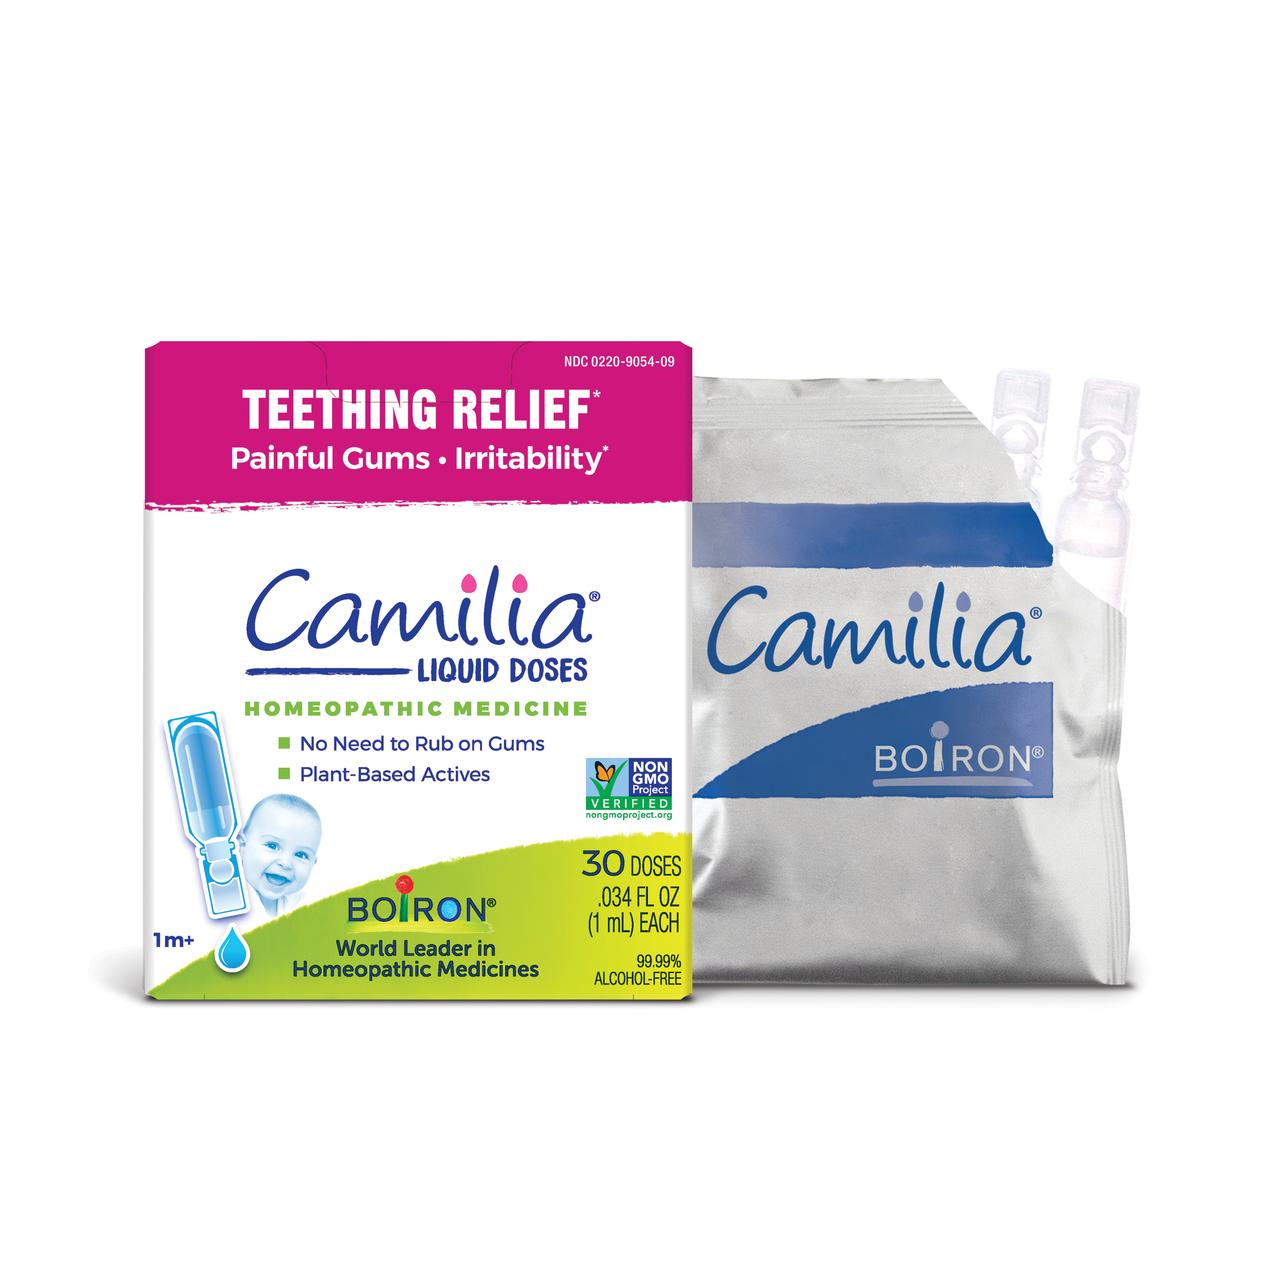 Boiron Camilia, Homeopathic Medicine for Teething Relief, 30 Single Liquid Doses - image 3 of 10